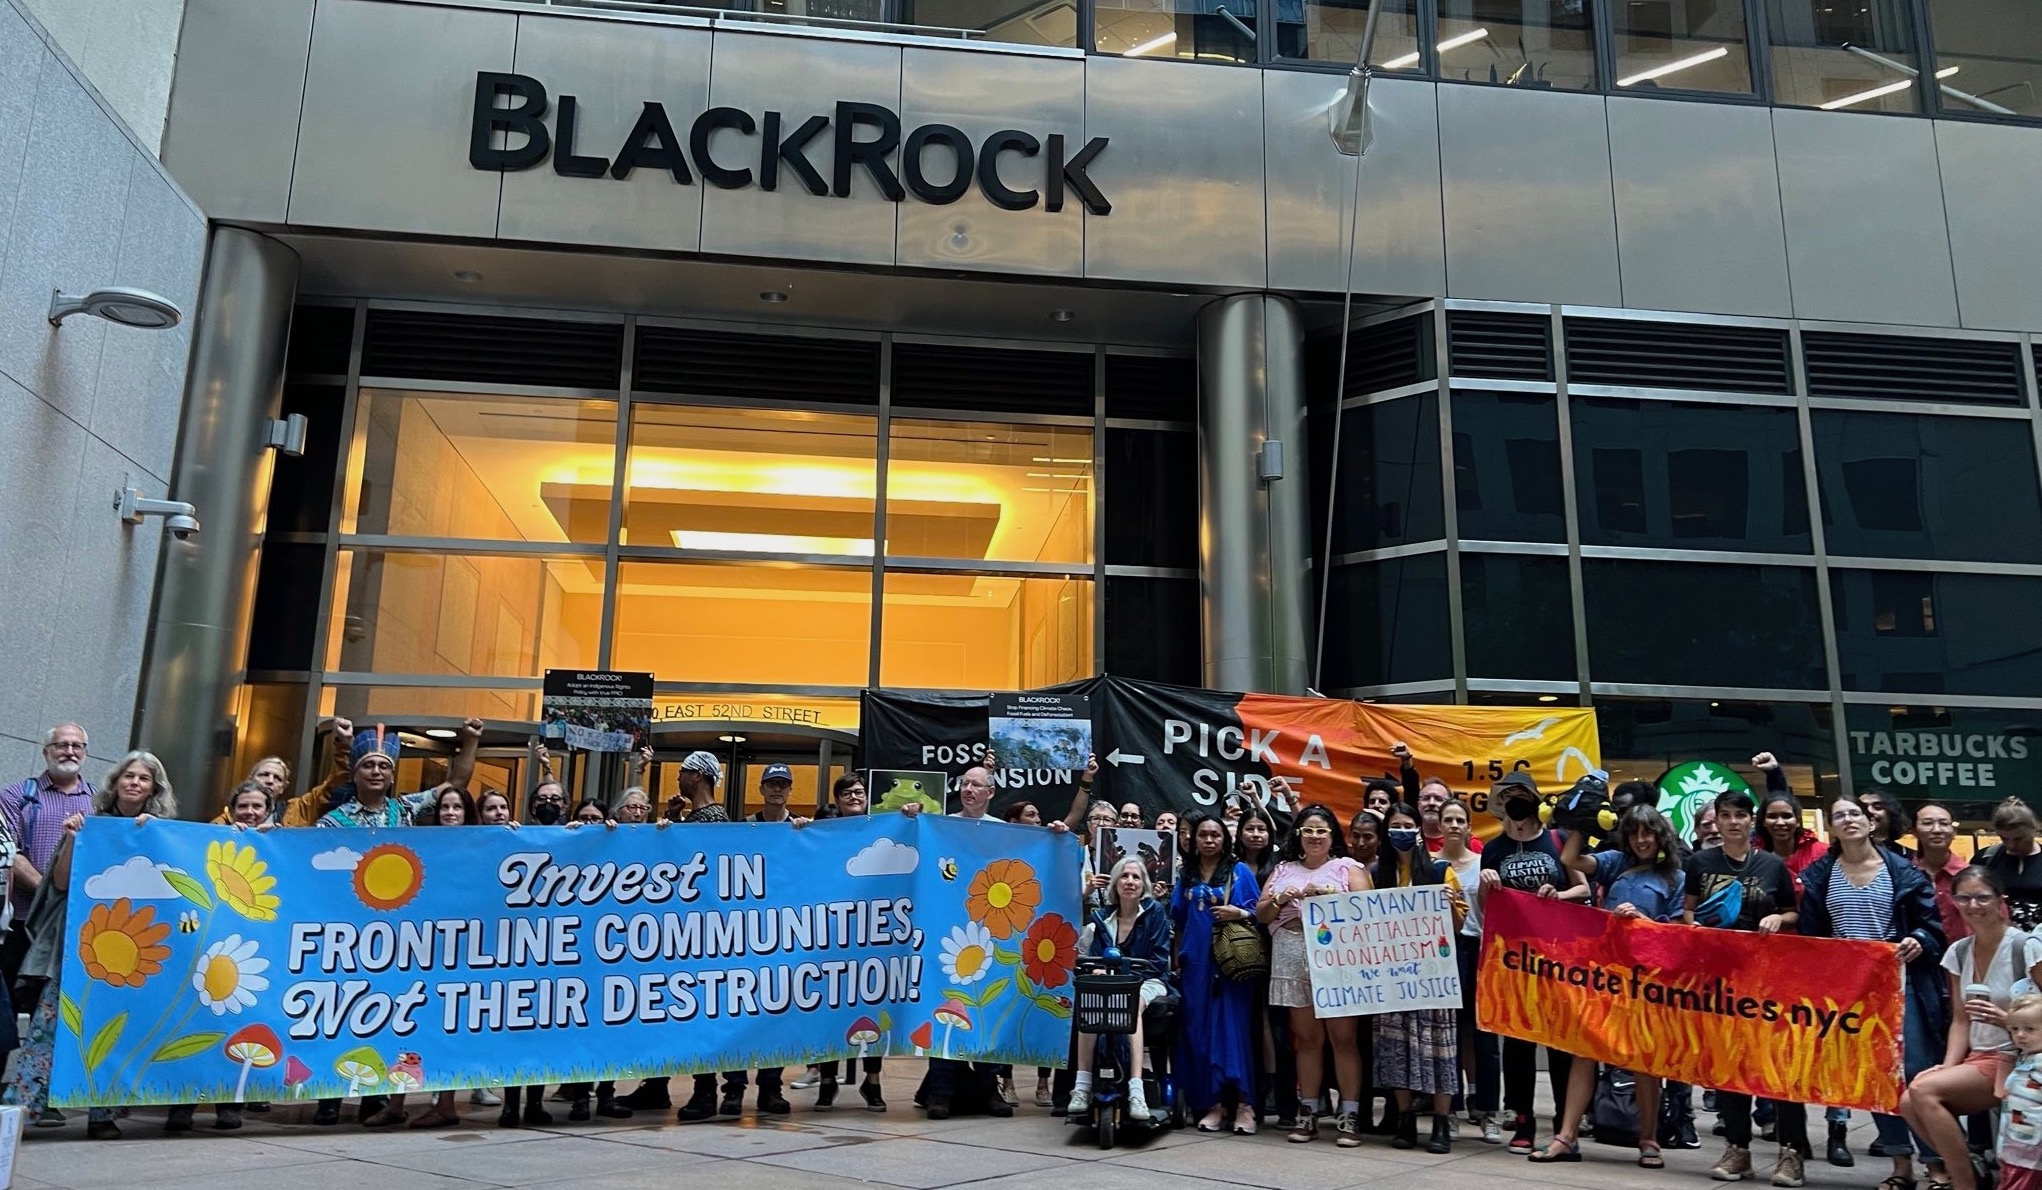 A large group of protestors holding signs and banners gather in front of BlackRock's NYC headquarters.